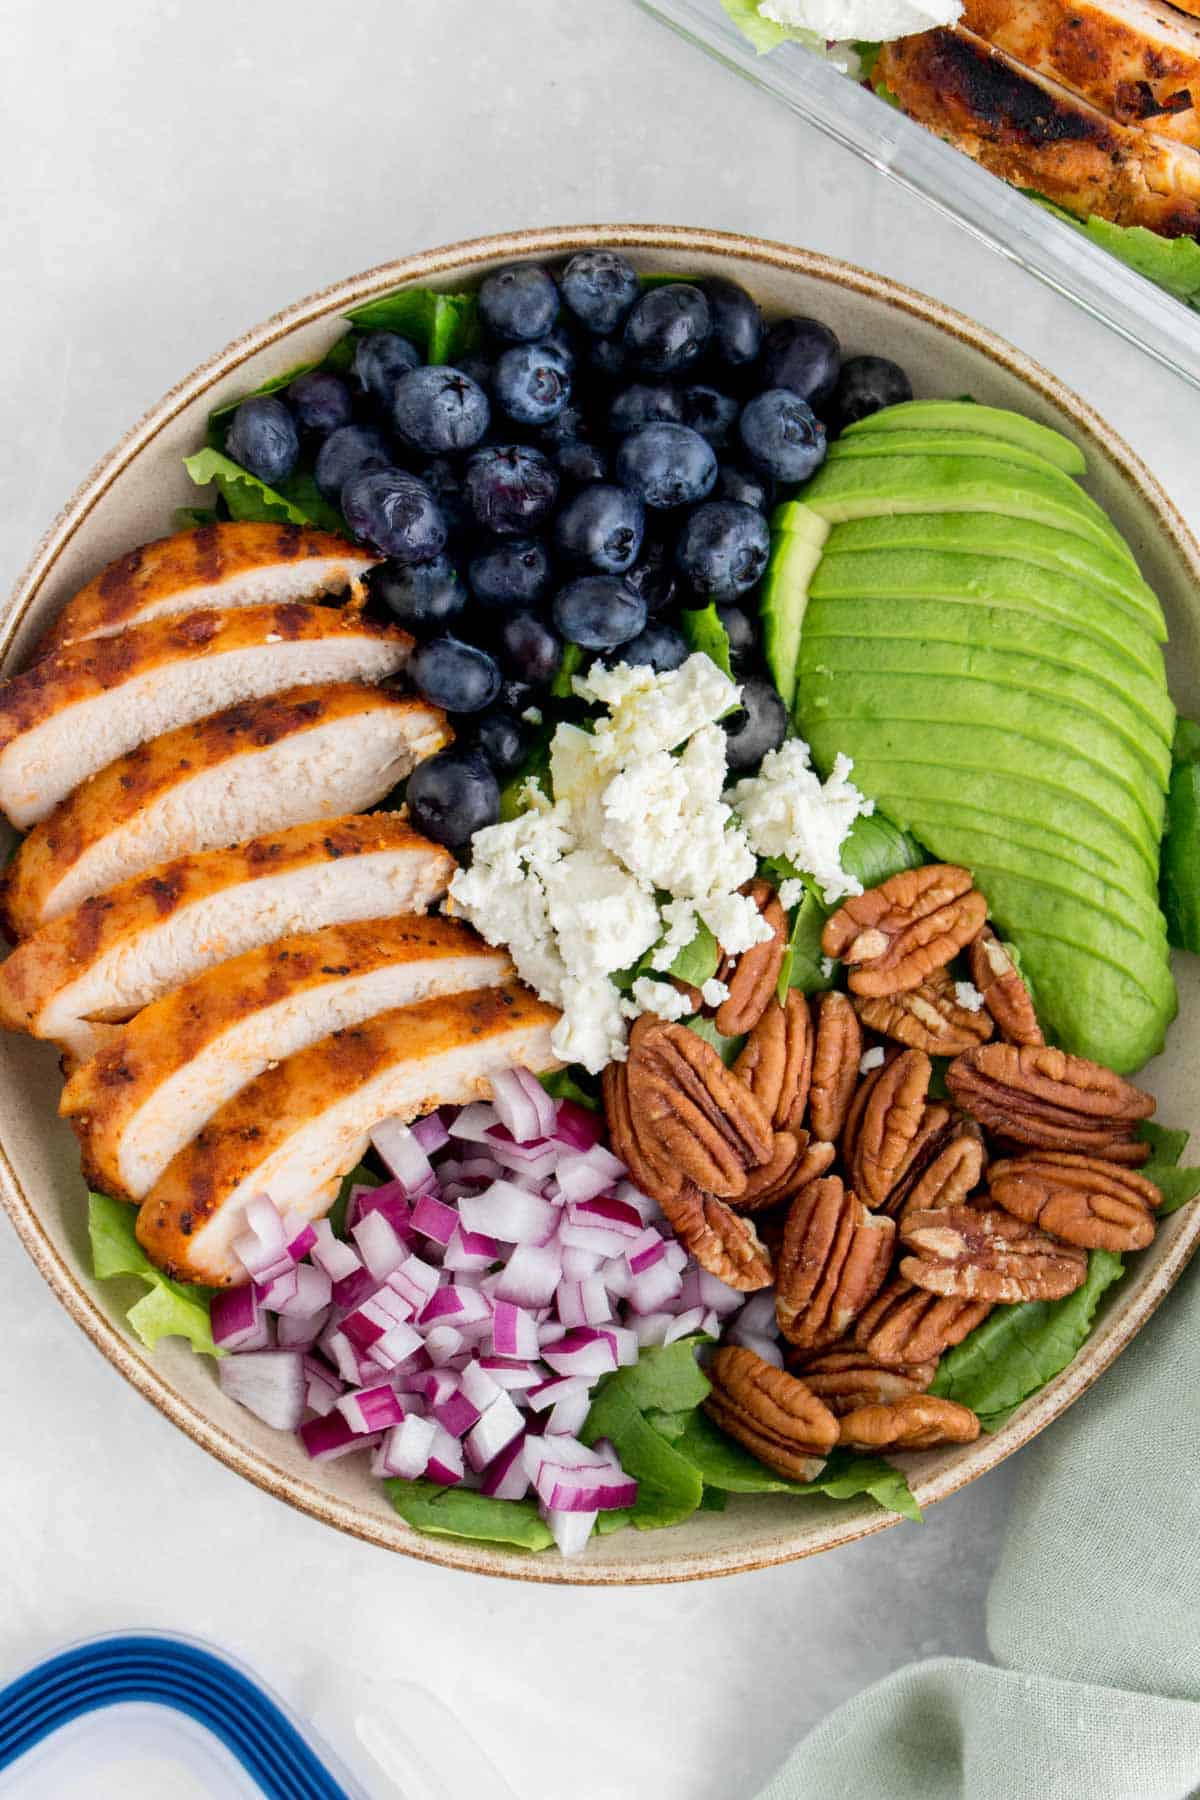 A plate of grilled chicken salad with blueberries, pecans, onions, avocado, and goat cheese.